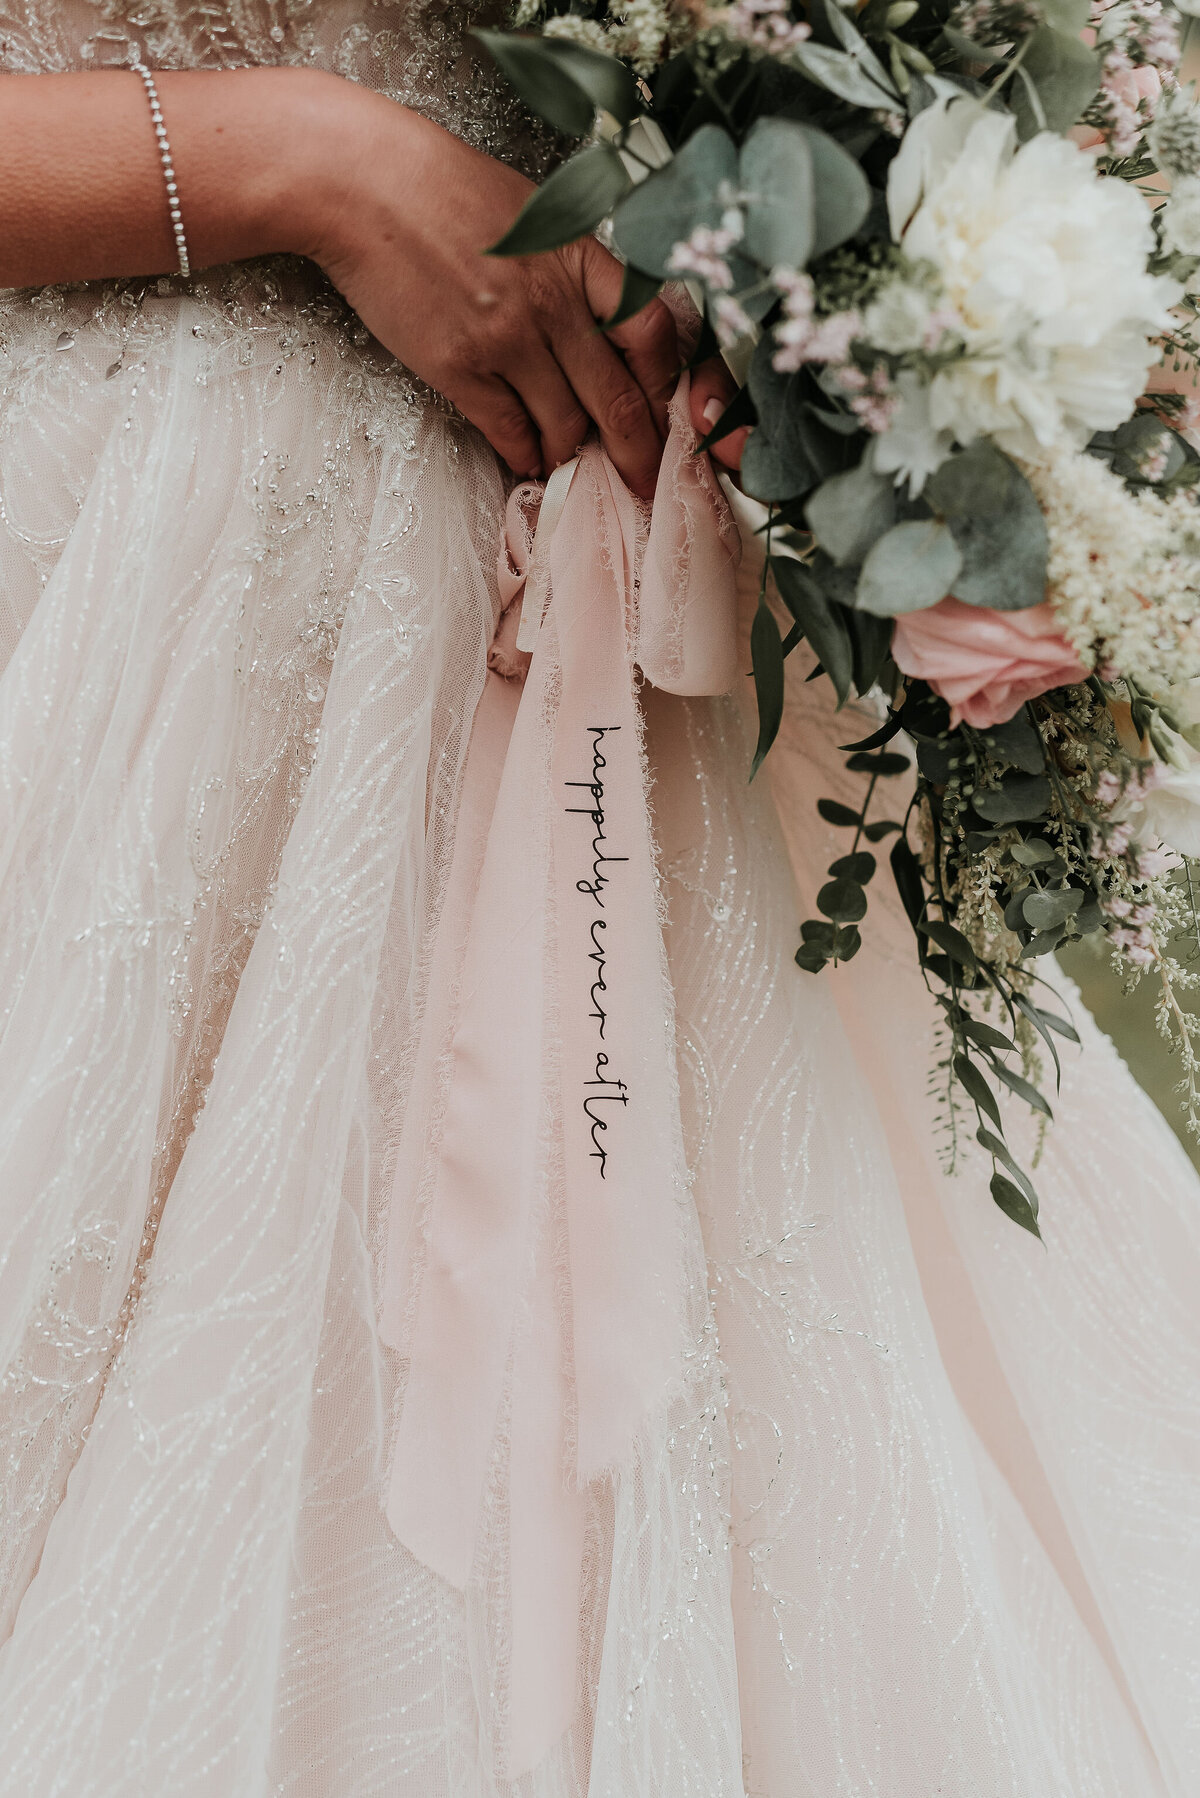 Blush pink ribbon on bridal bouquet with Happily Ever After writing at barn wedding at Odo's Barn, Ashford